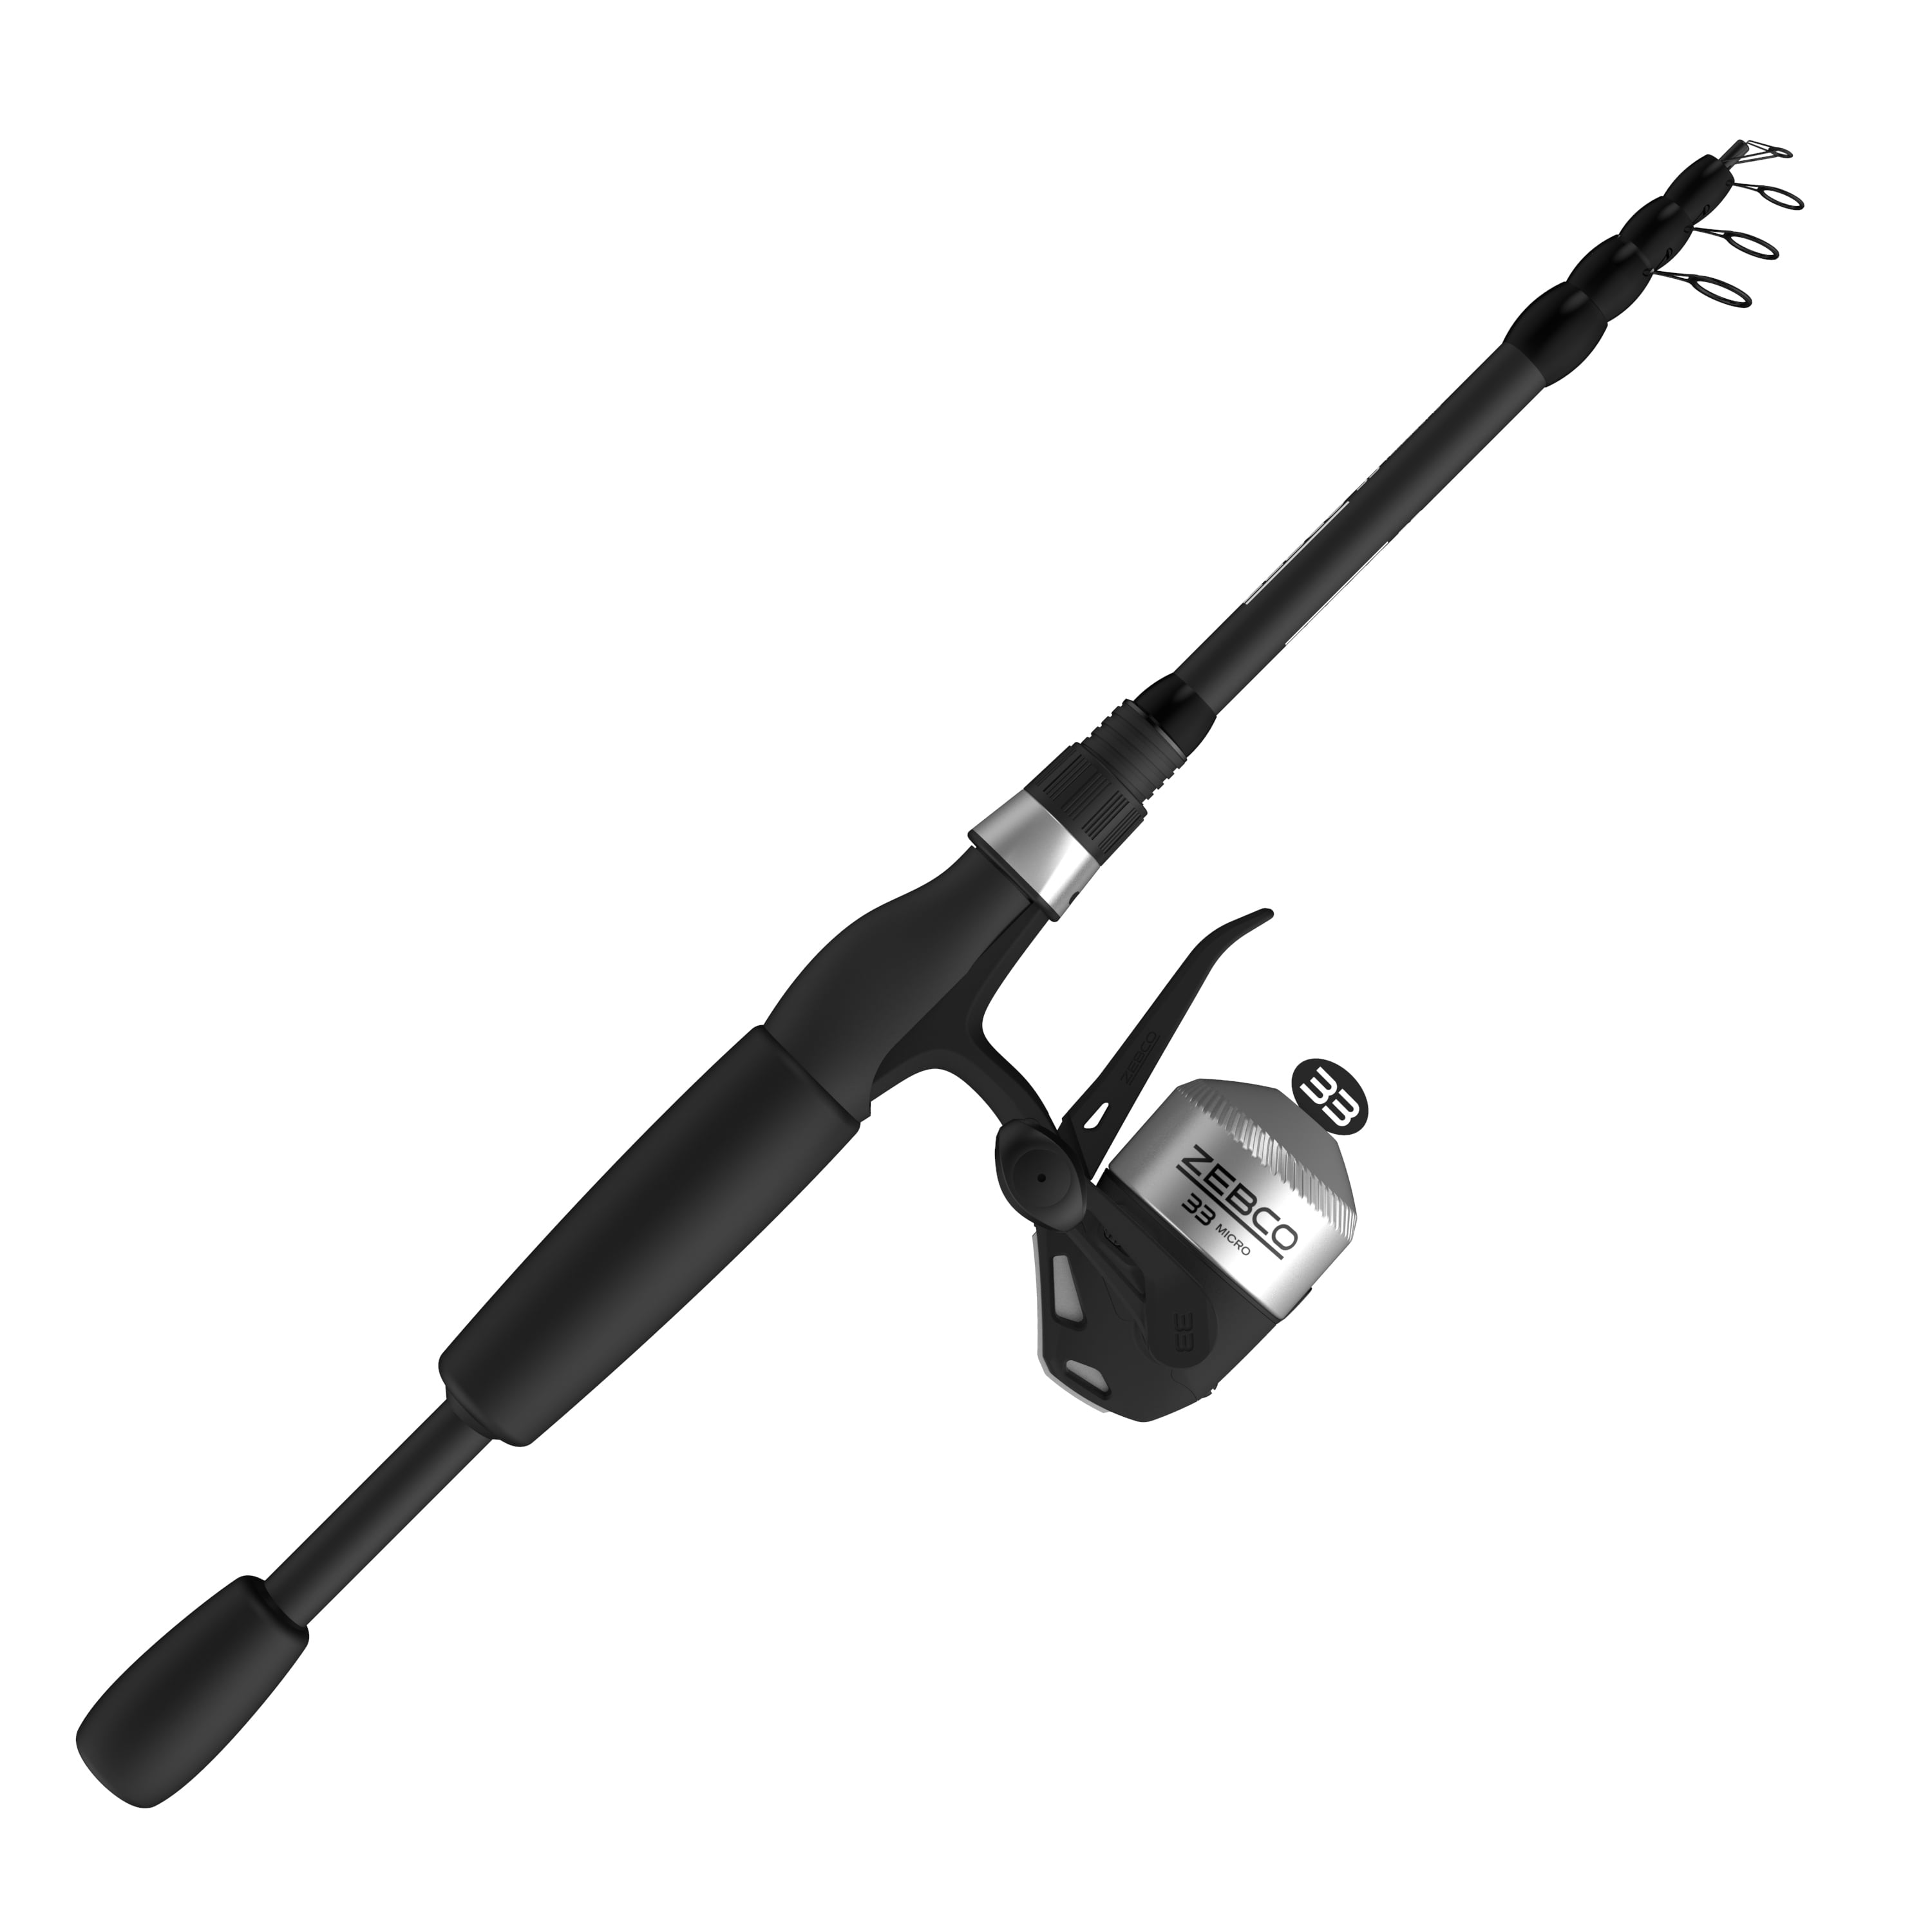 ZEBCO 33 SPINCAST 6' TELESCOPING Fishing Combo Rod and Reel NEW #33605MTEL 